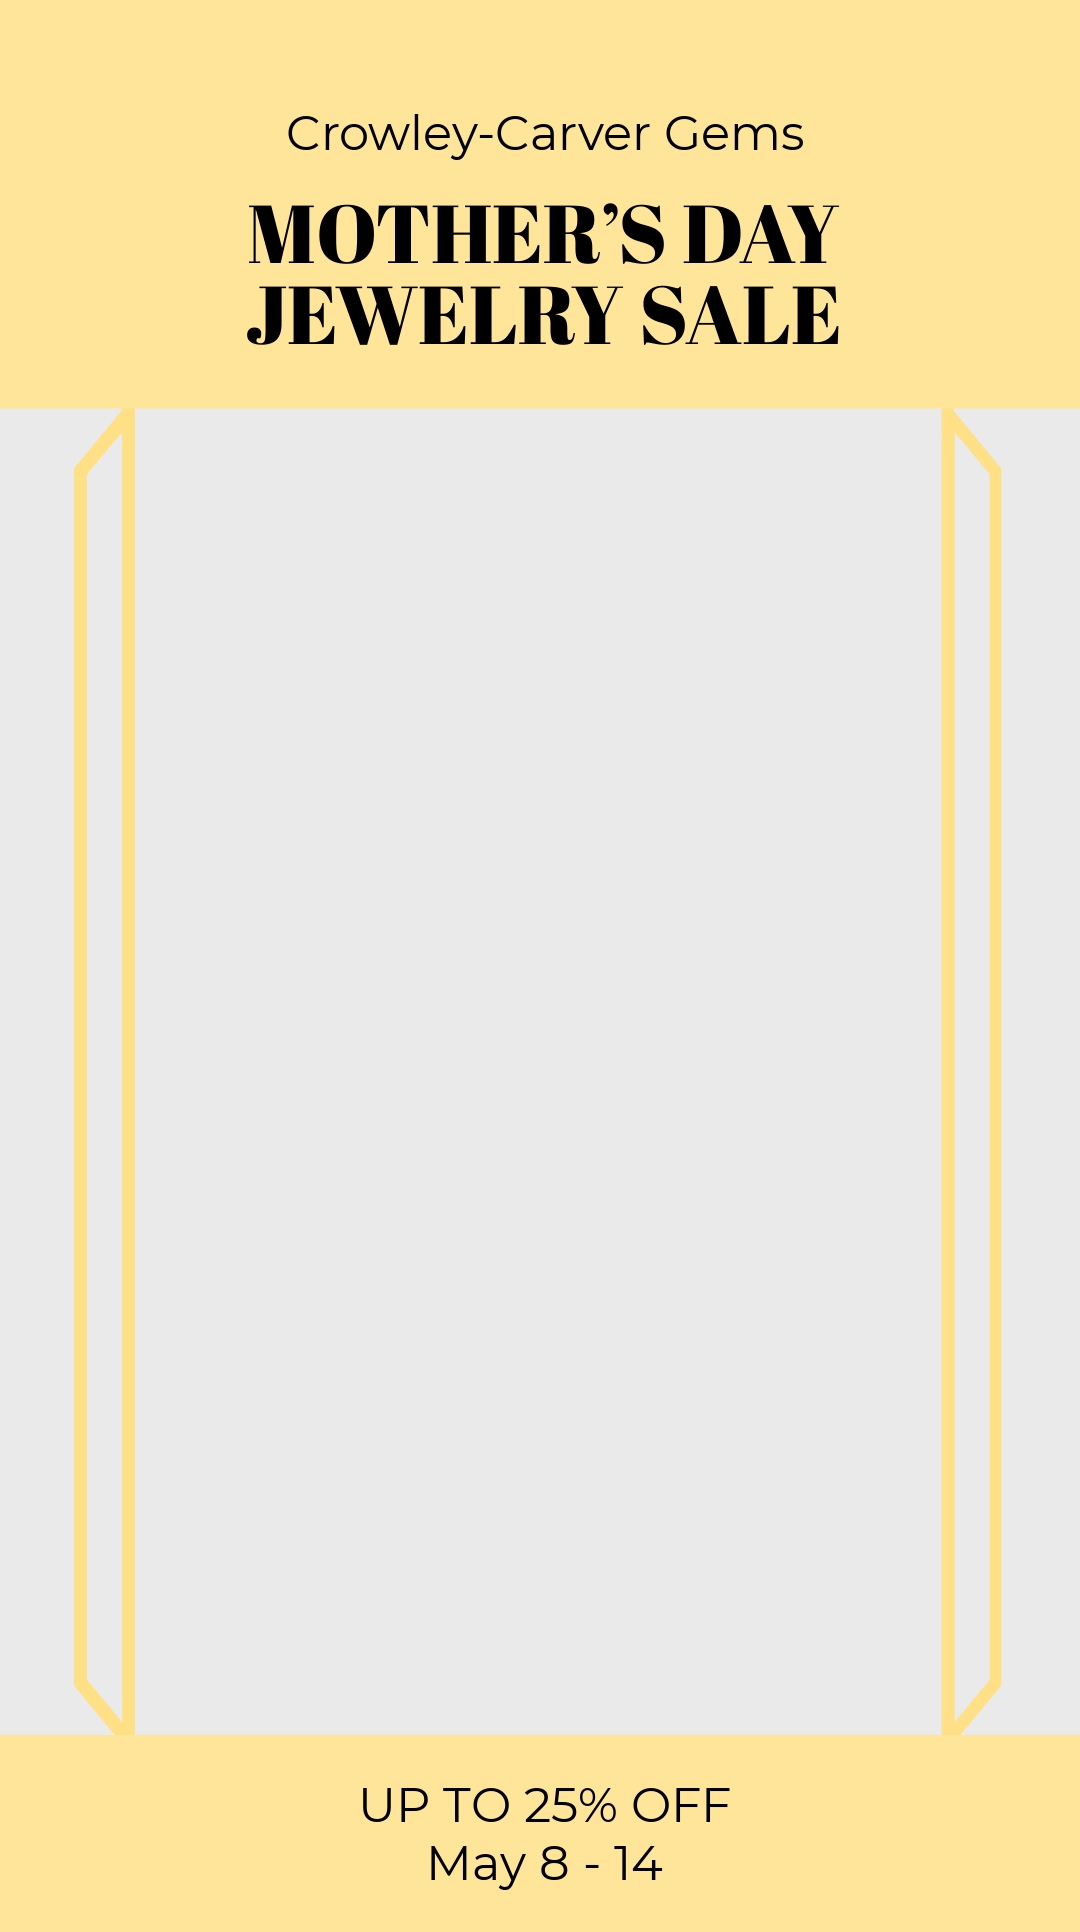 Free Jewelry Sale Snapchat Geofilter Template